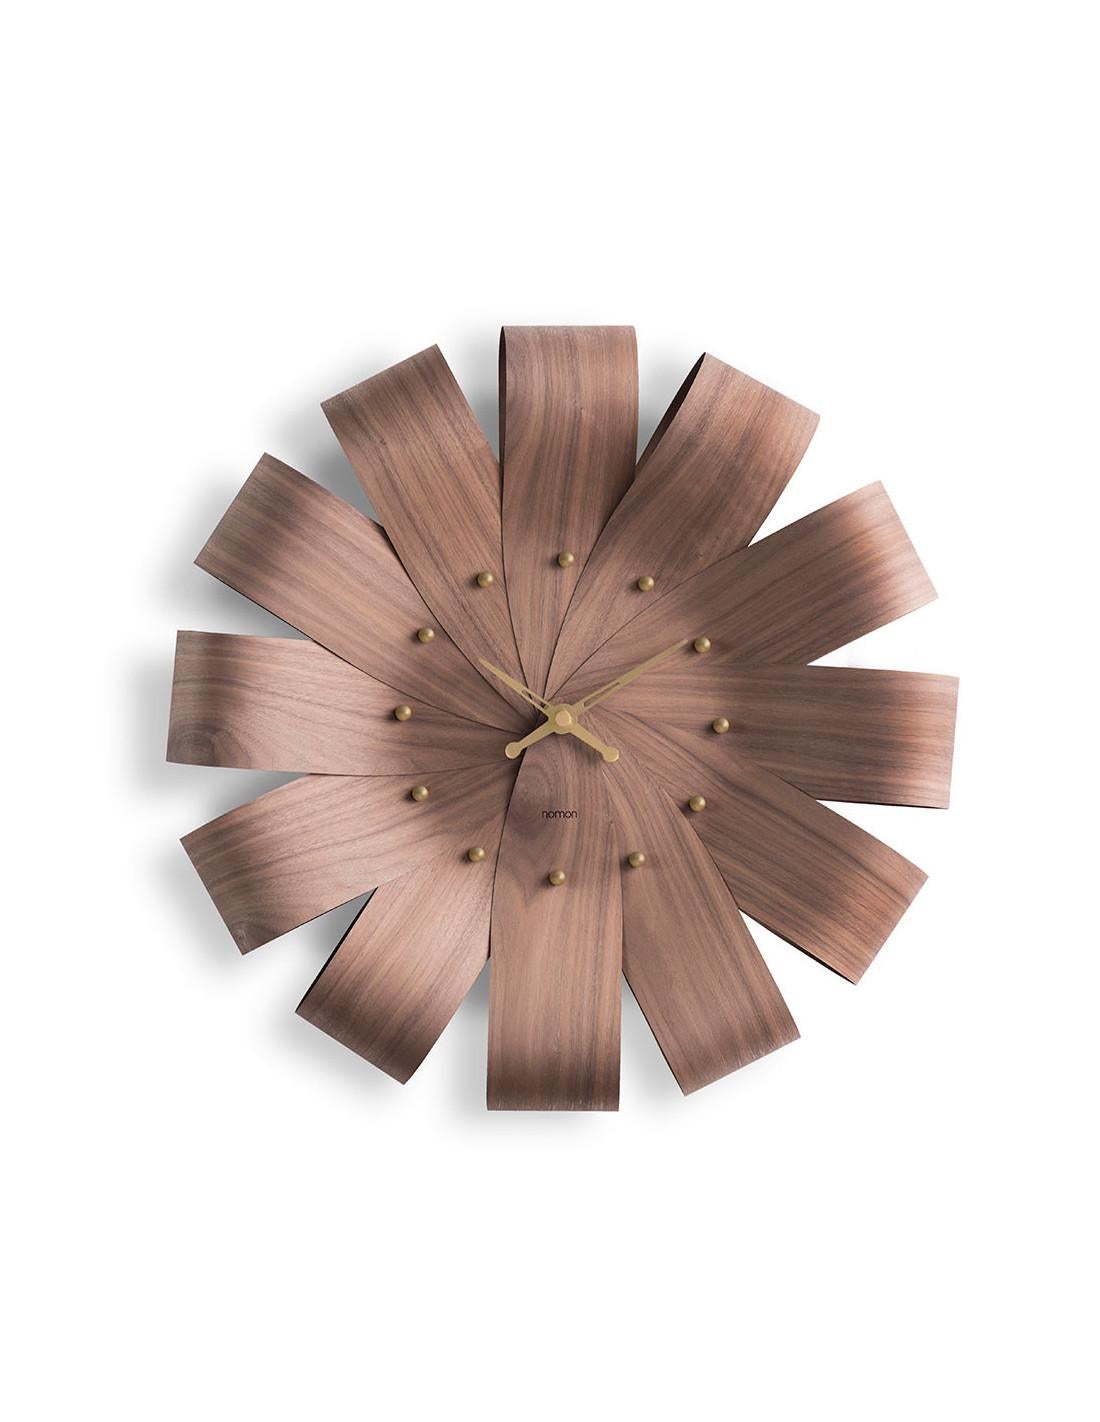 Ciclo Gold wall clock made of oak or walnut veneer with polished brass hands and time signals.
Ciclo Gold wall clock : Body in walnut wood or in Oak wood or Walnut and Oak wood , hands and time signals in polished brass
Each clock is a unique